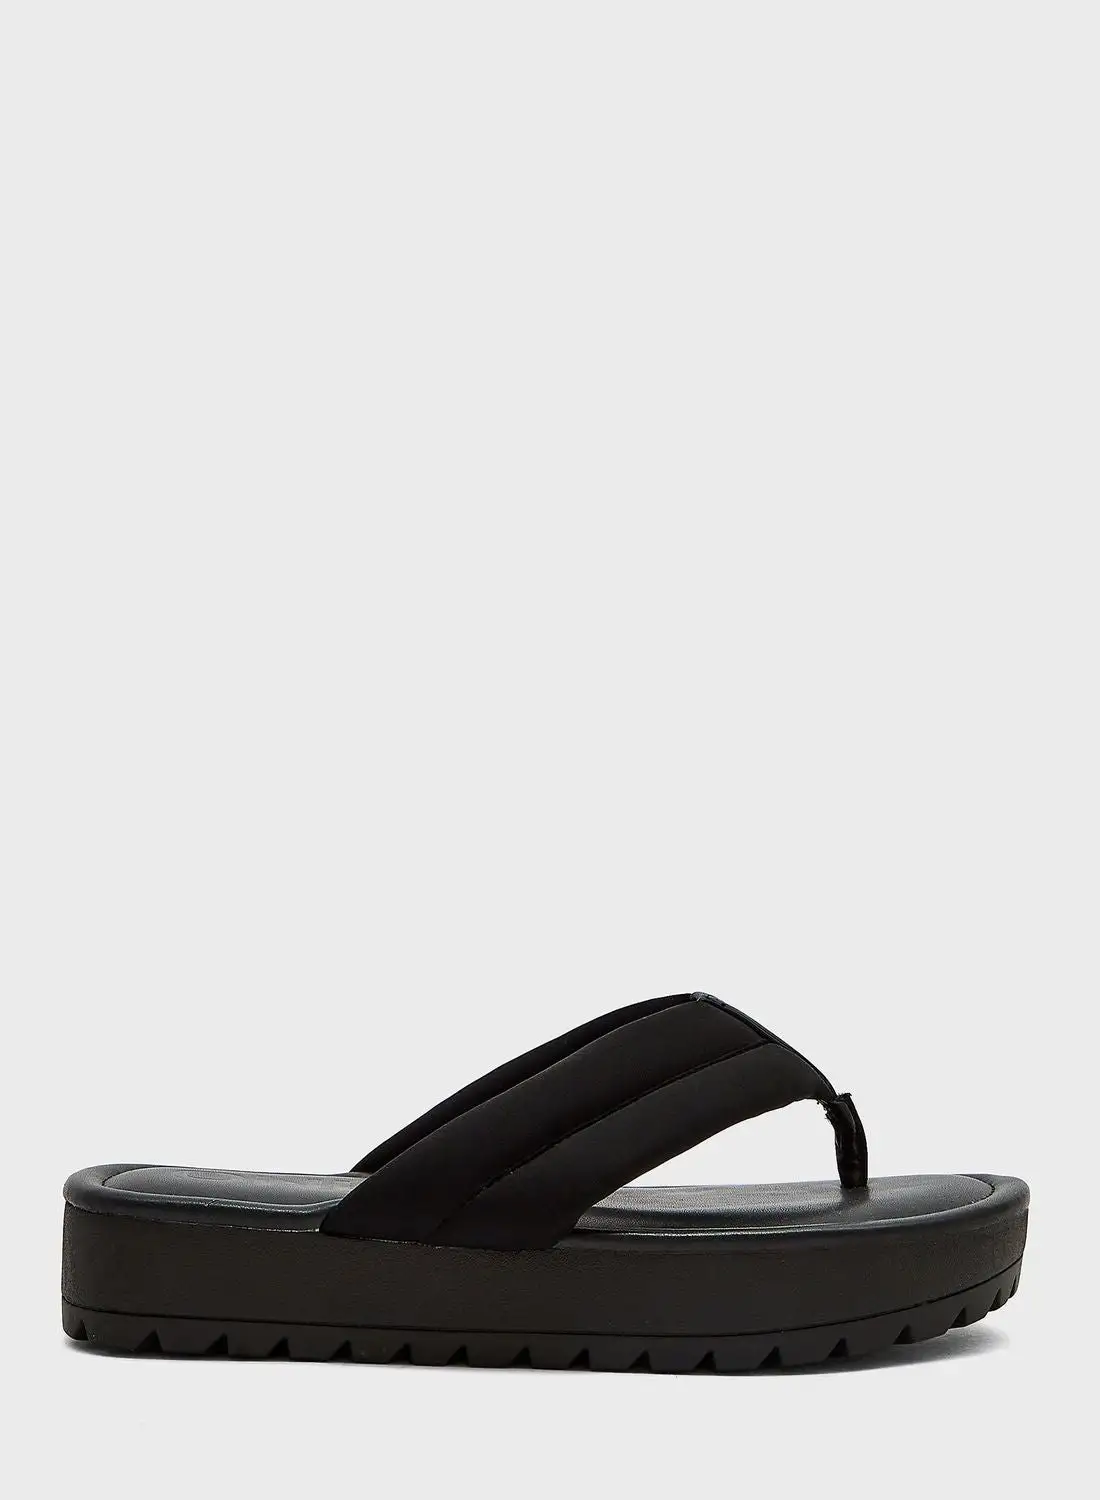 ONLY Moss-1 Wedge Sandals